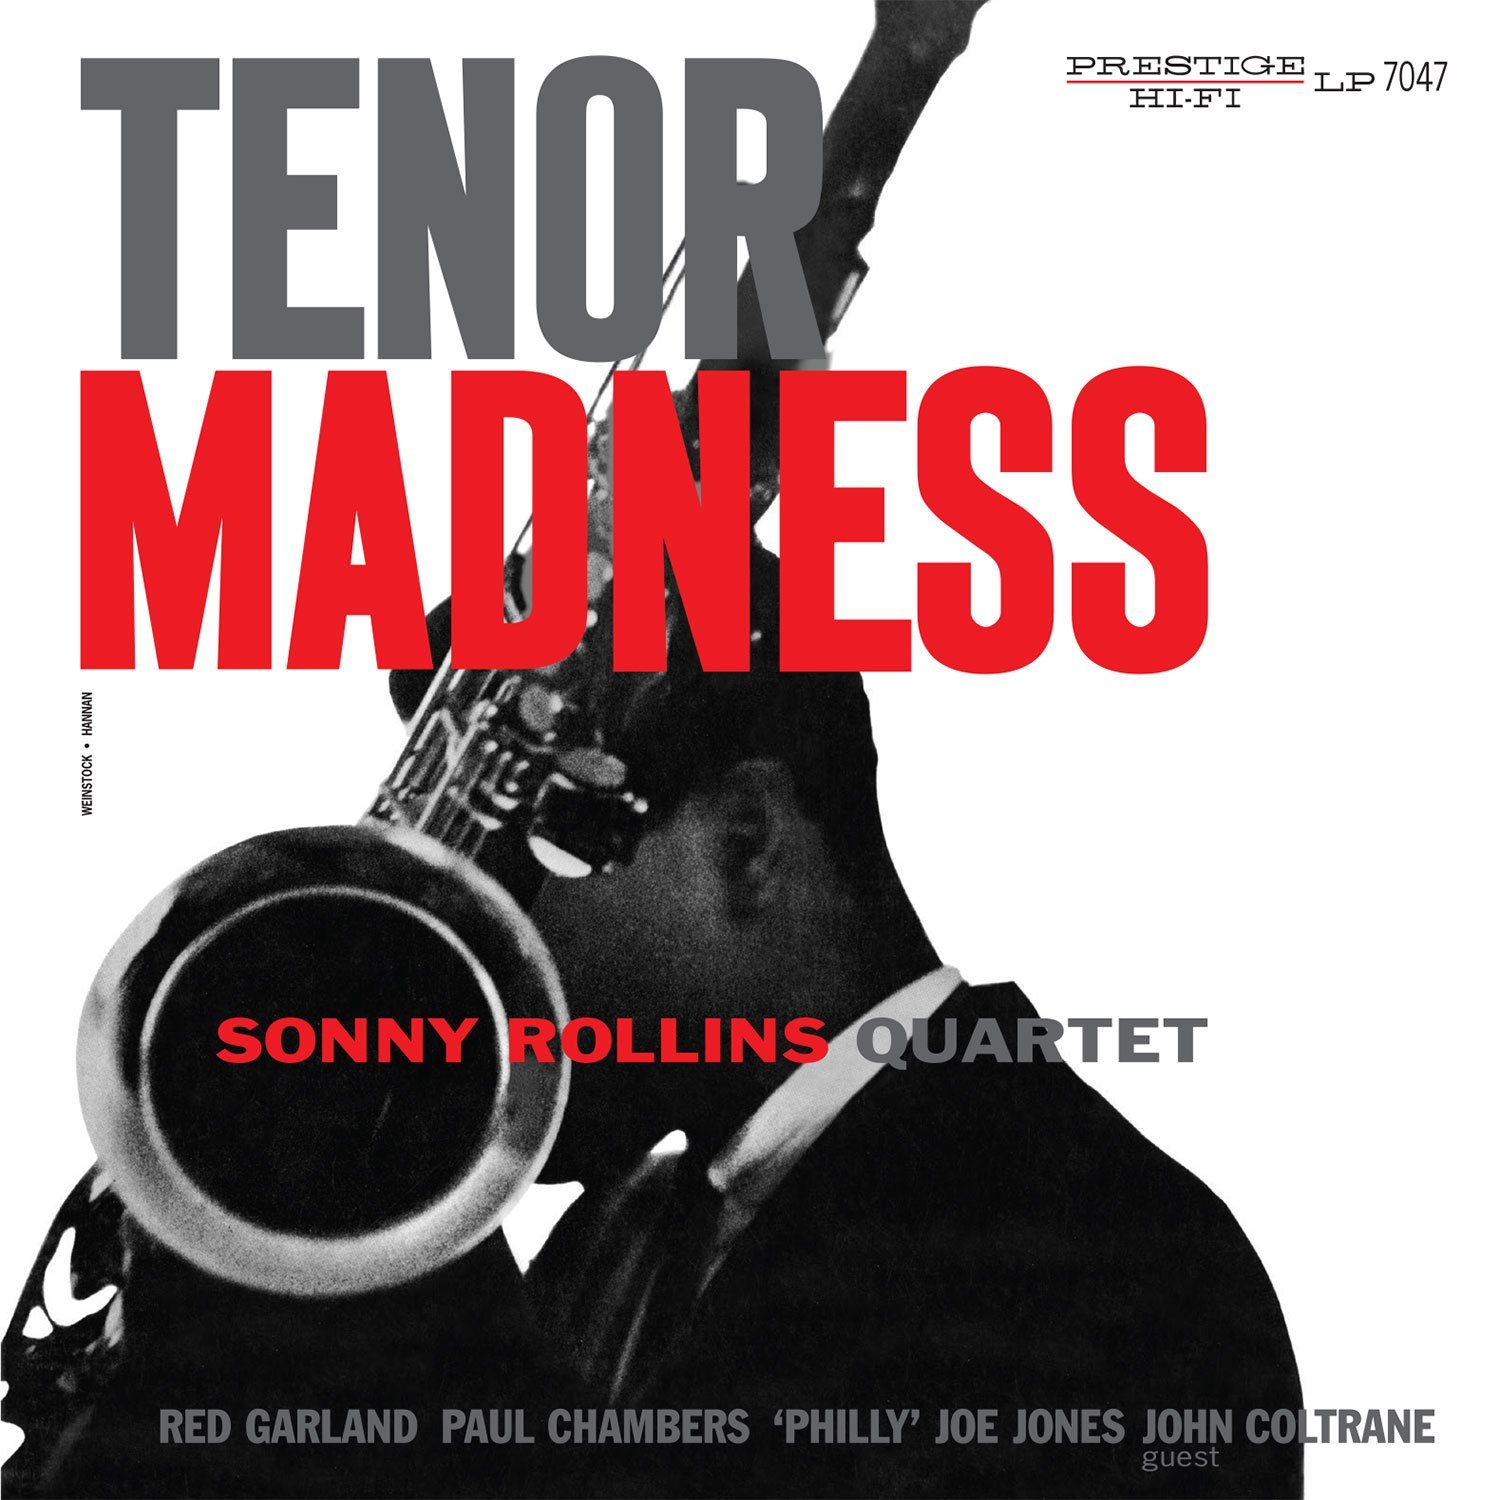 Sonny Rollins - Tenor Madness (1956) [Analogue Productions 2012] SACD ISO + FLAC 24bit/96 kHz